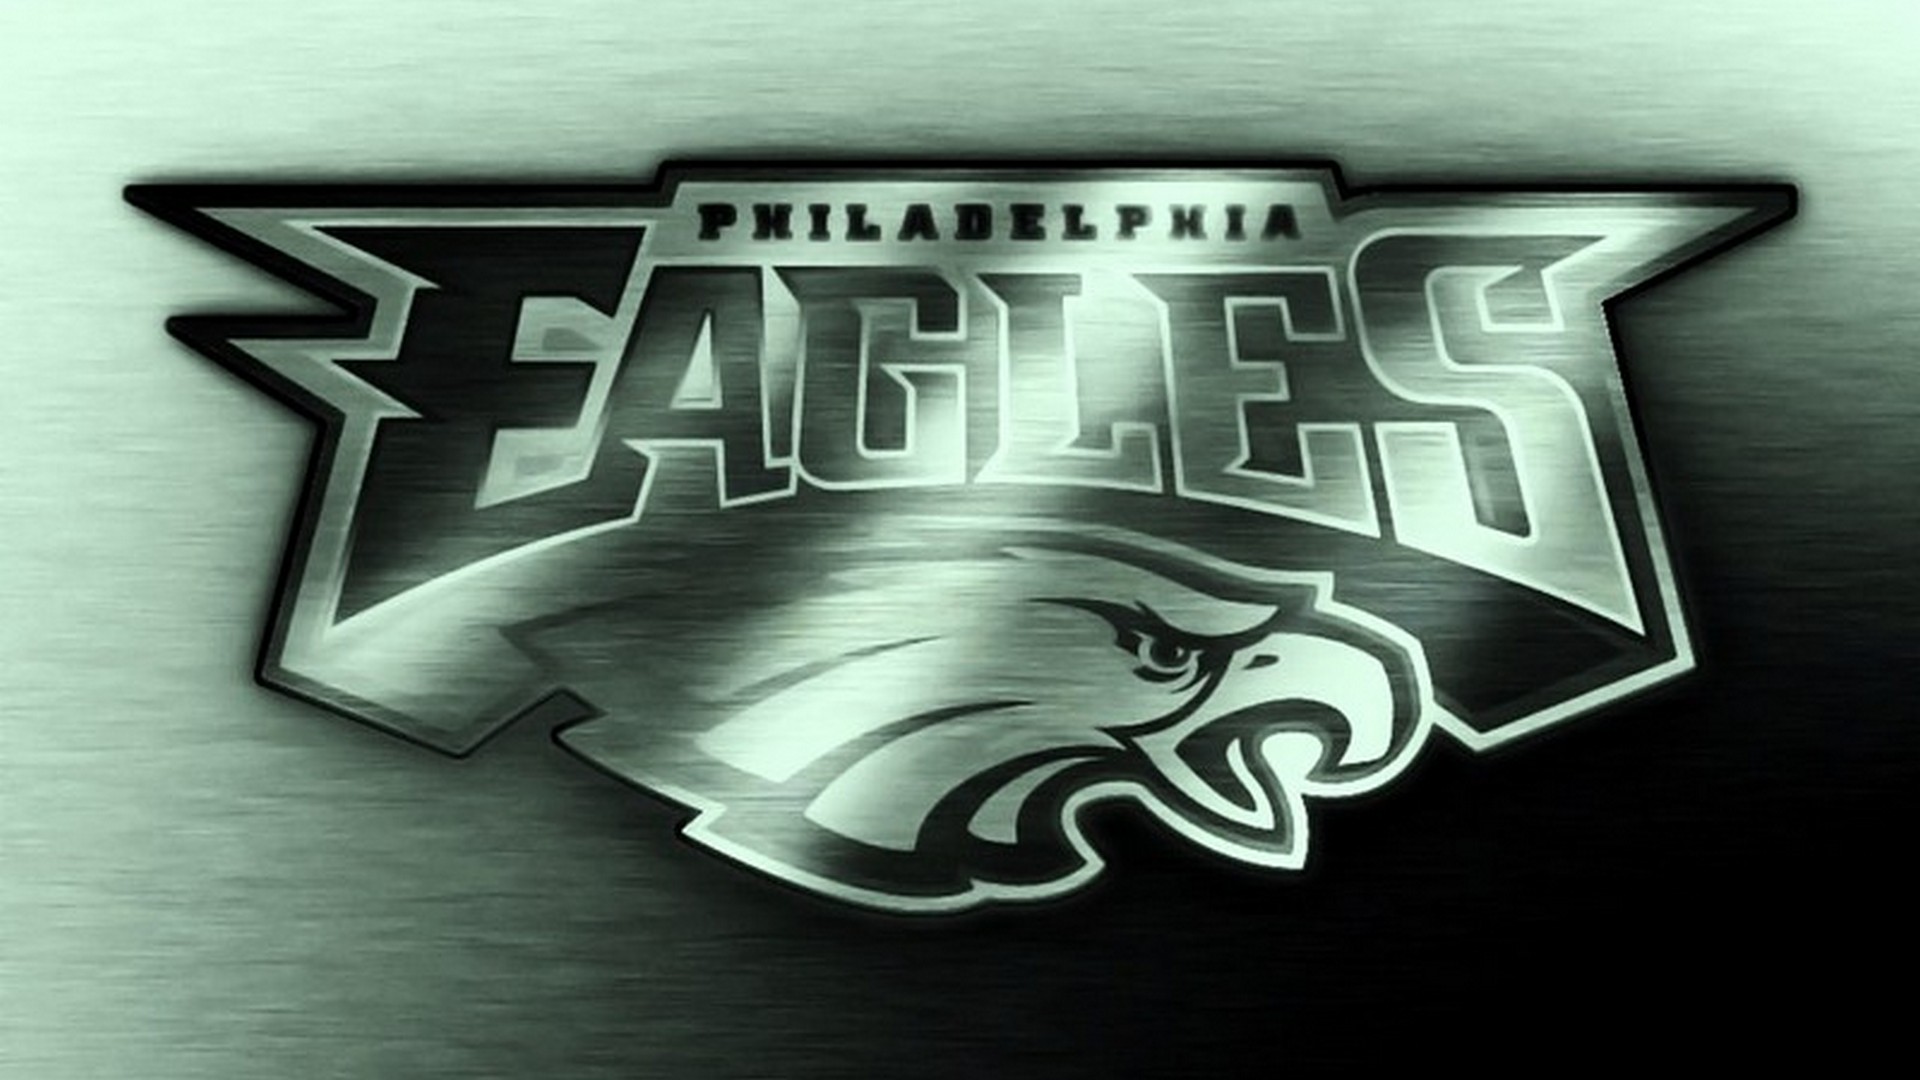 HD Eagles Football Backgrounds With Resolution 1920X1080 pixel. You can make this wallpaper for your Mac or Windows Desktop Background, iPhone, Android or Tablet and another Smartphone device for free